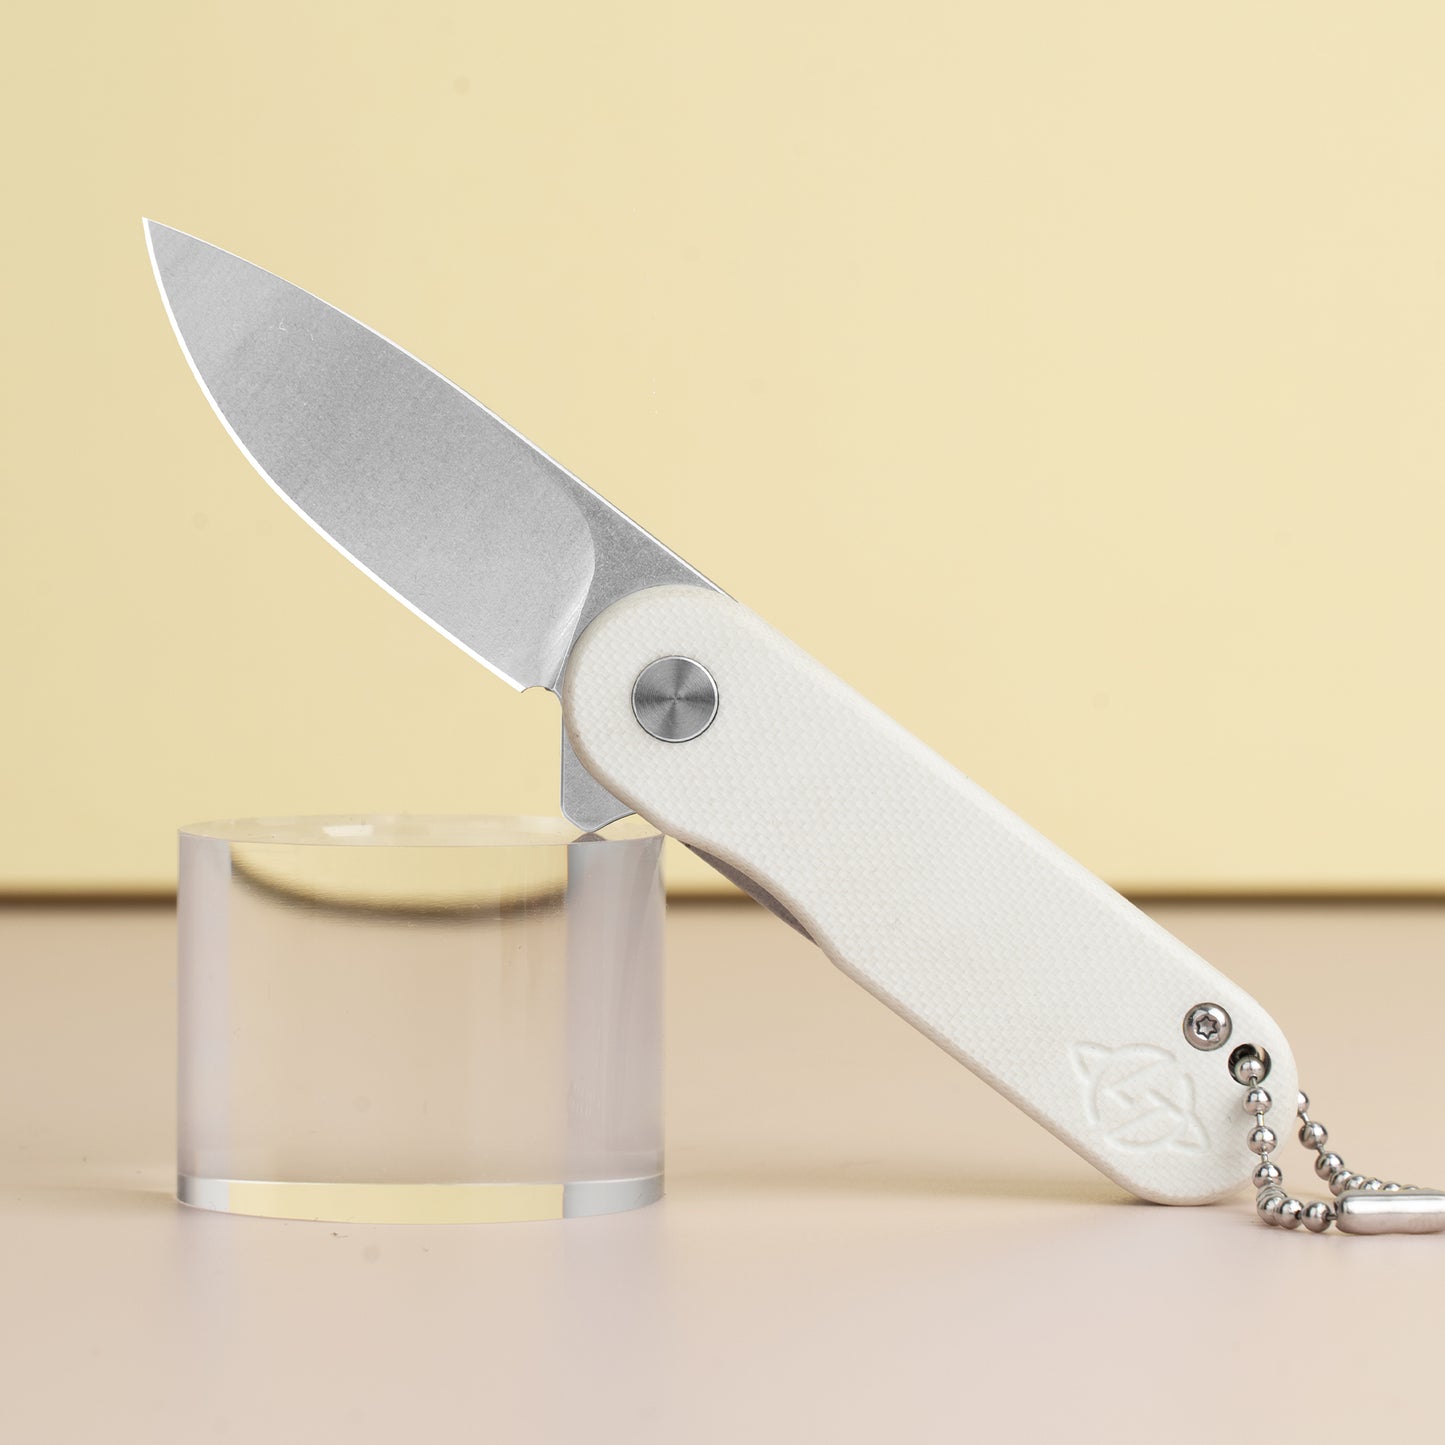 G048 Mini Folding Knife 1.93" D2 Blade White G10 Handle, Small Folding Knife with Deep Carry Pocket Clip For EDC